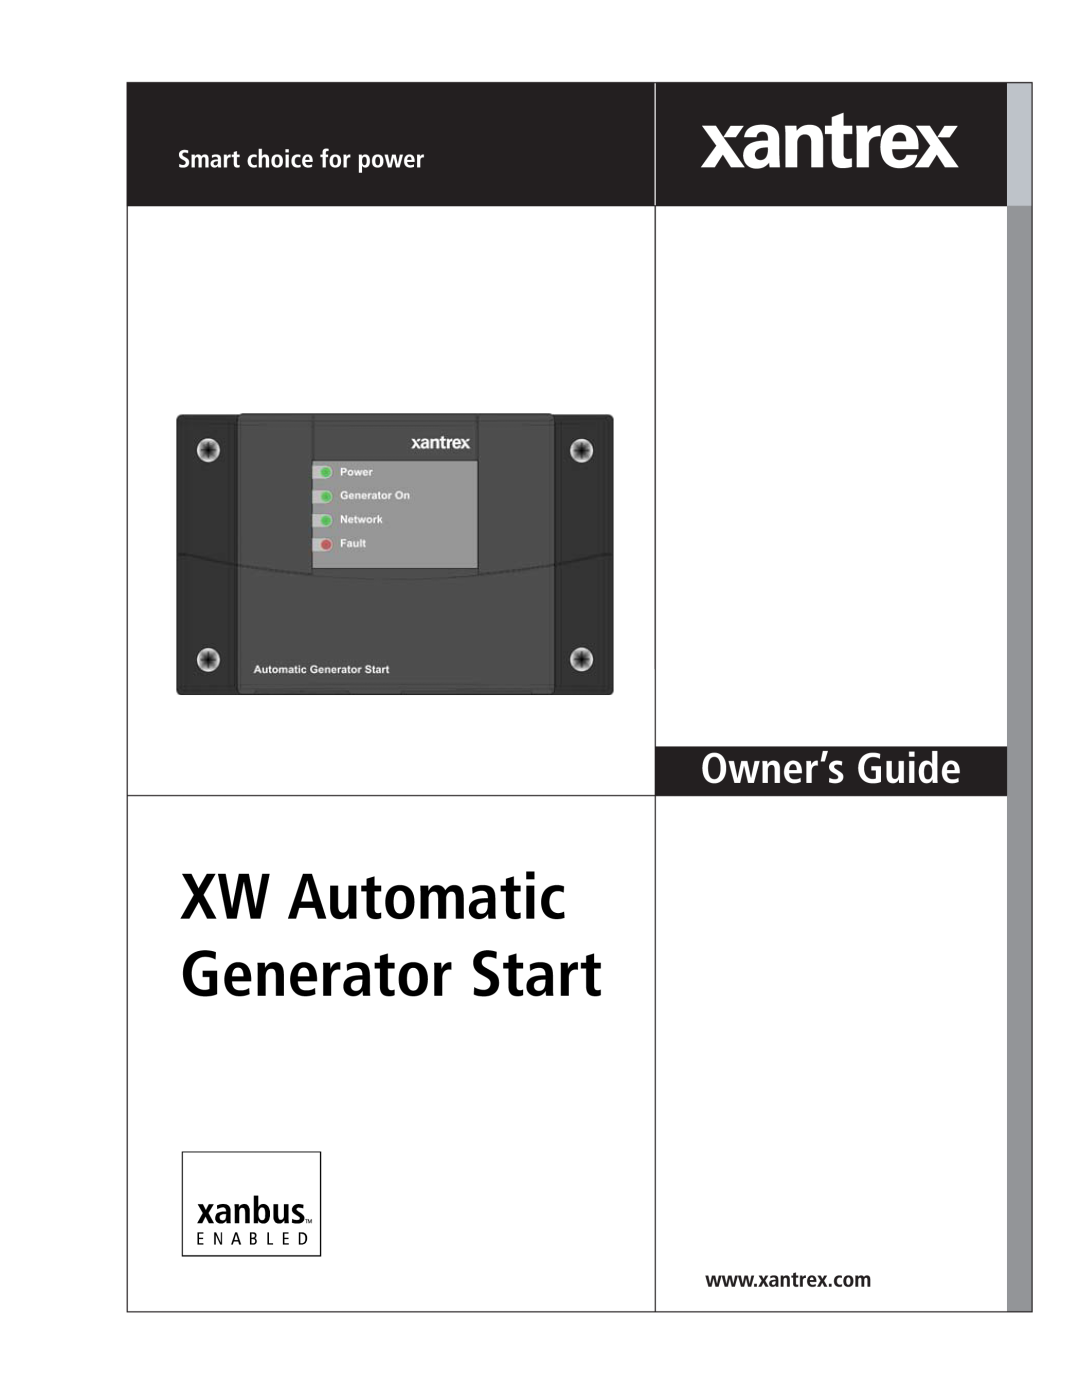 Xantrex Technology manual XW Automatic Generator Start, Owner’s Guide 